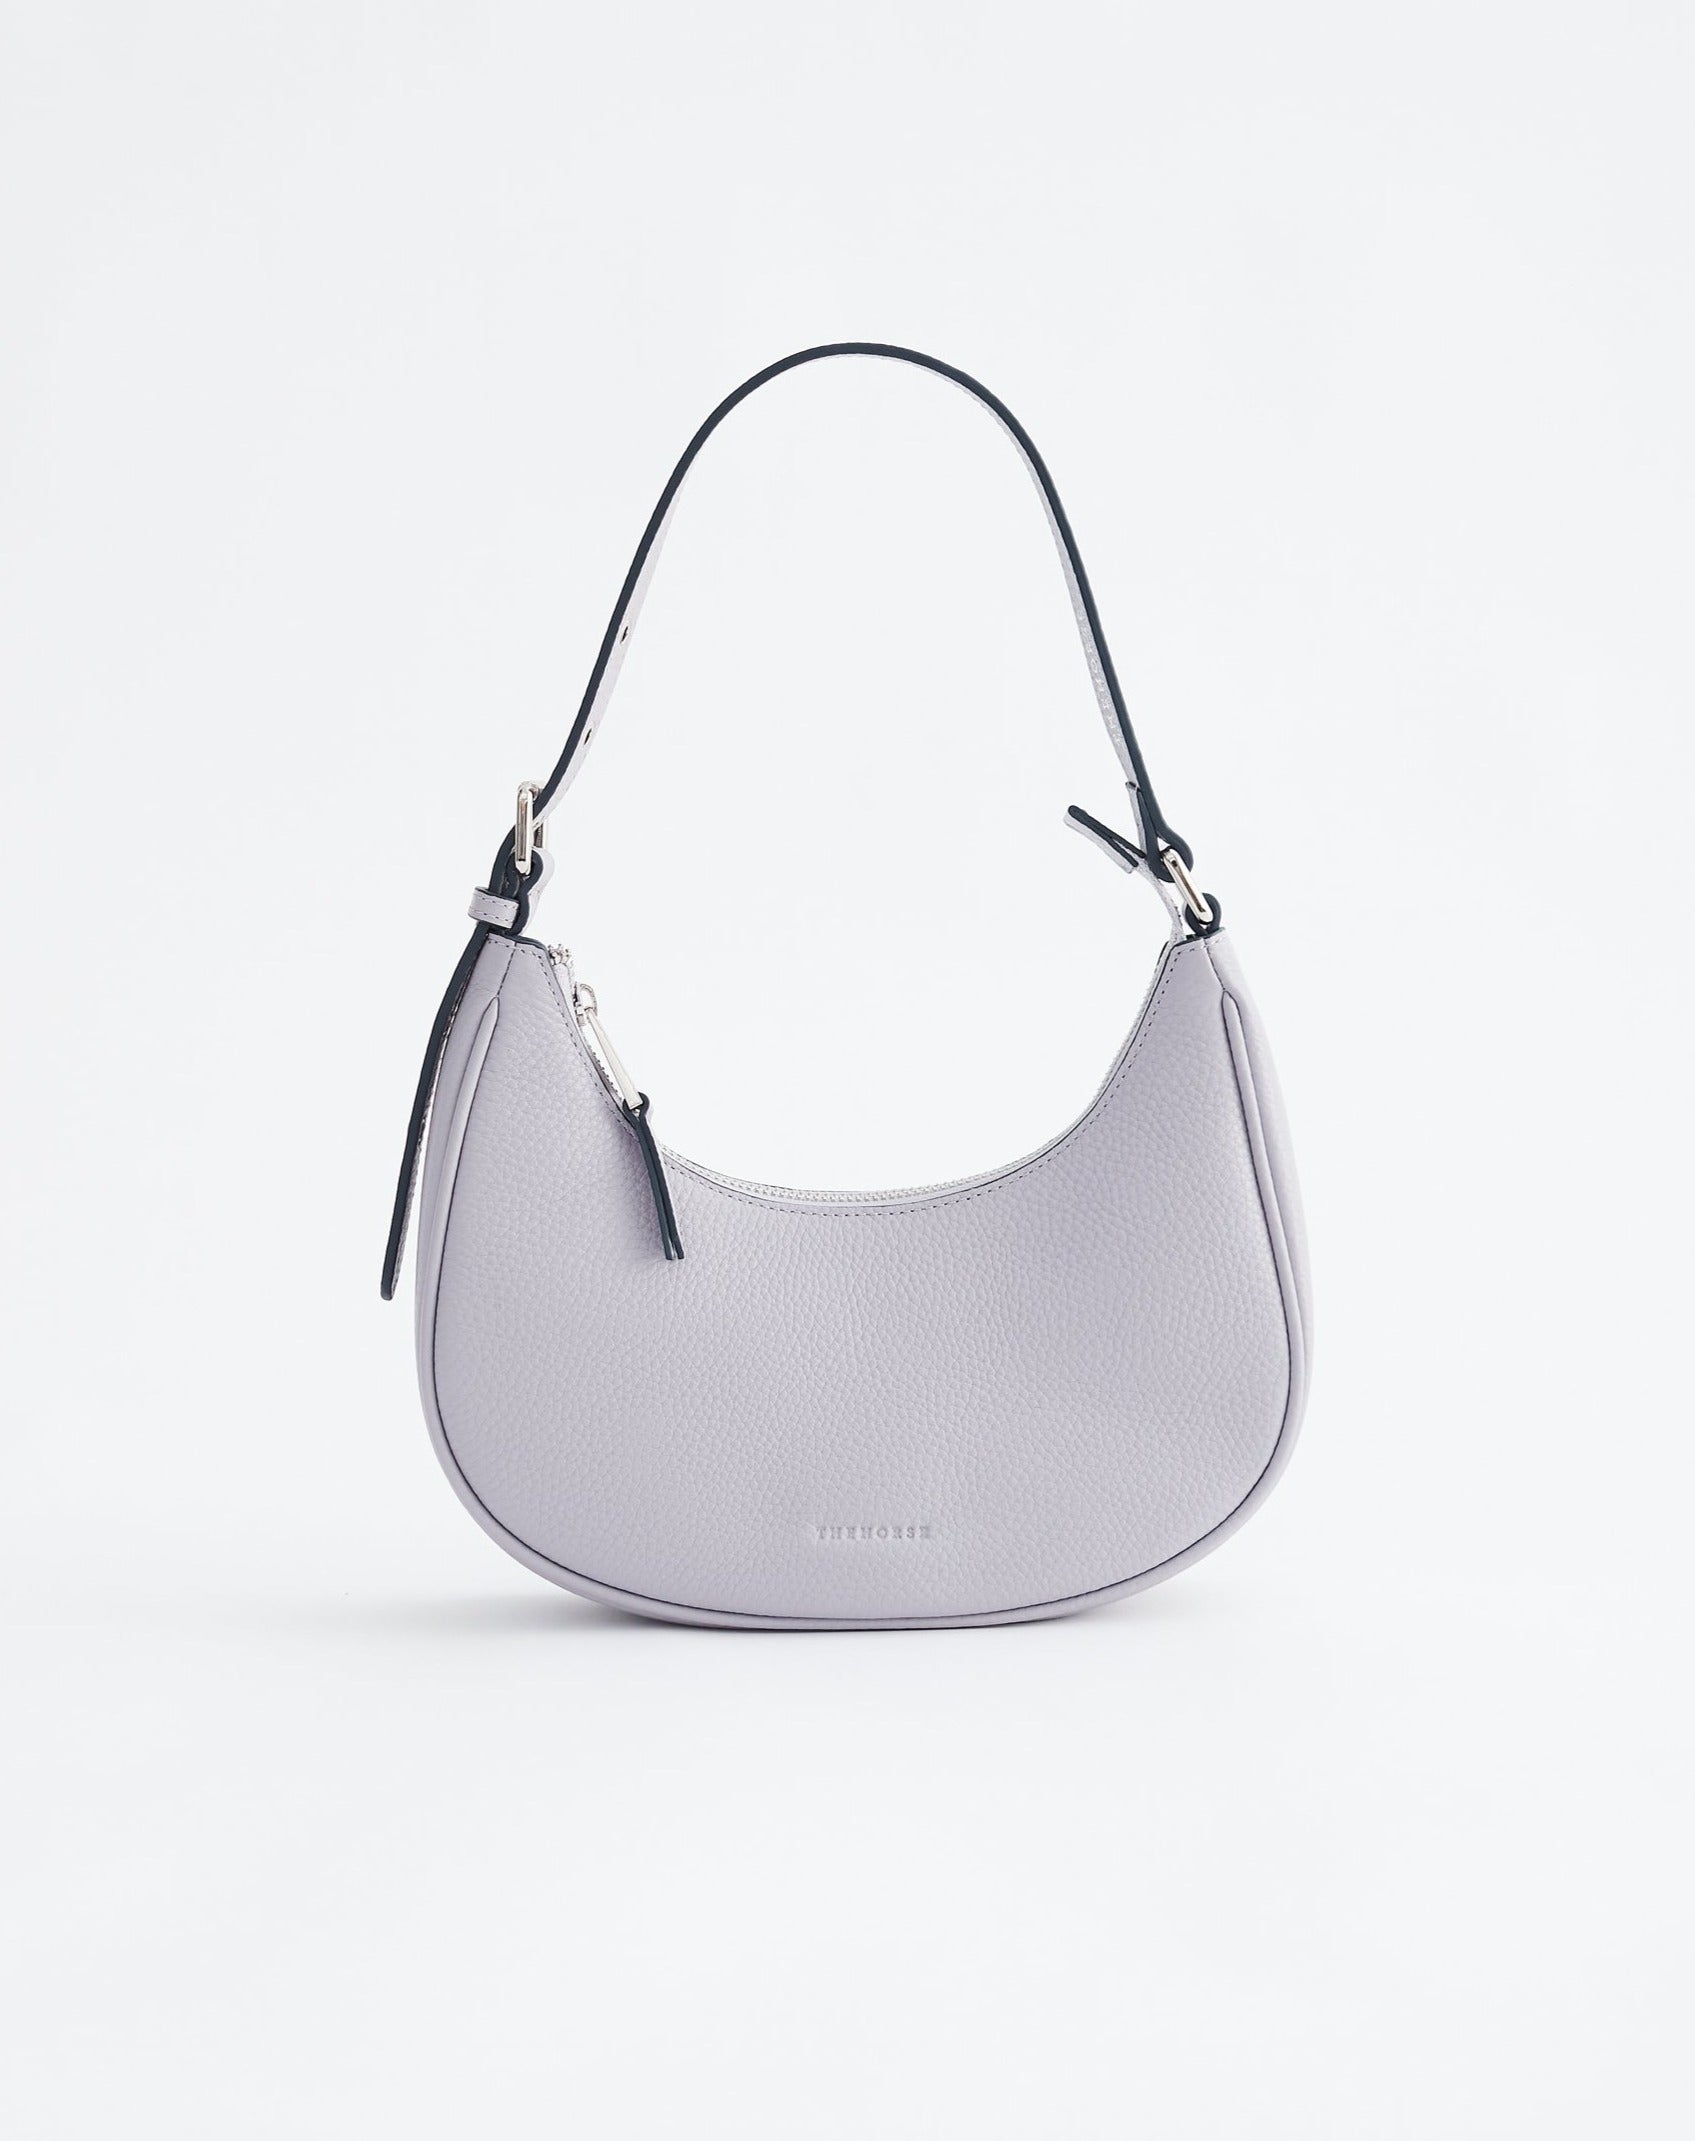 Friday Bag: Leather Crescent Bag in Violet by The Horse®